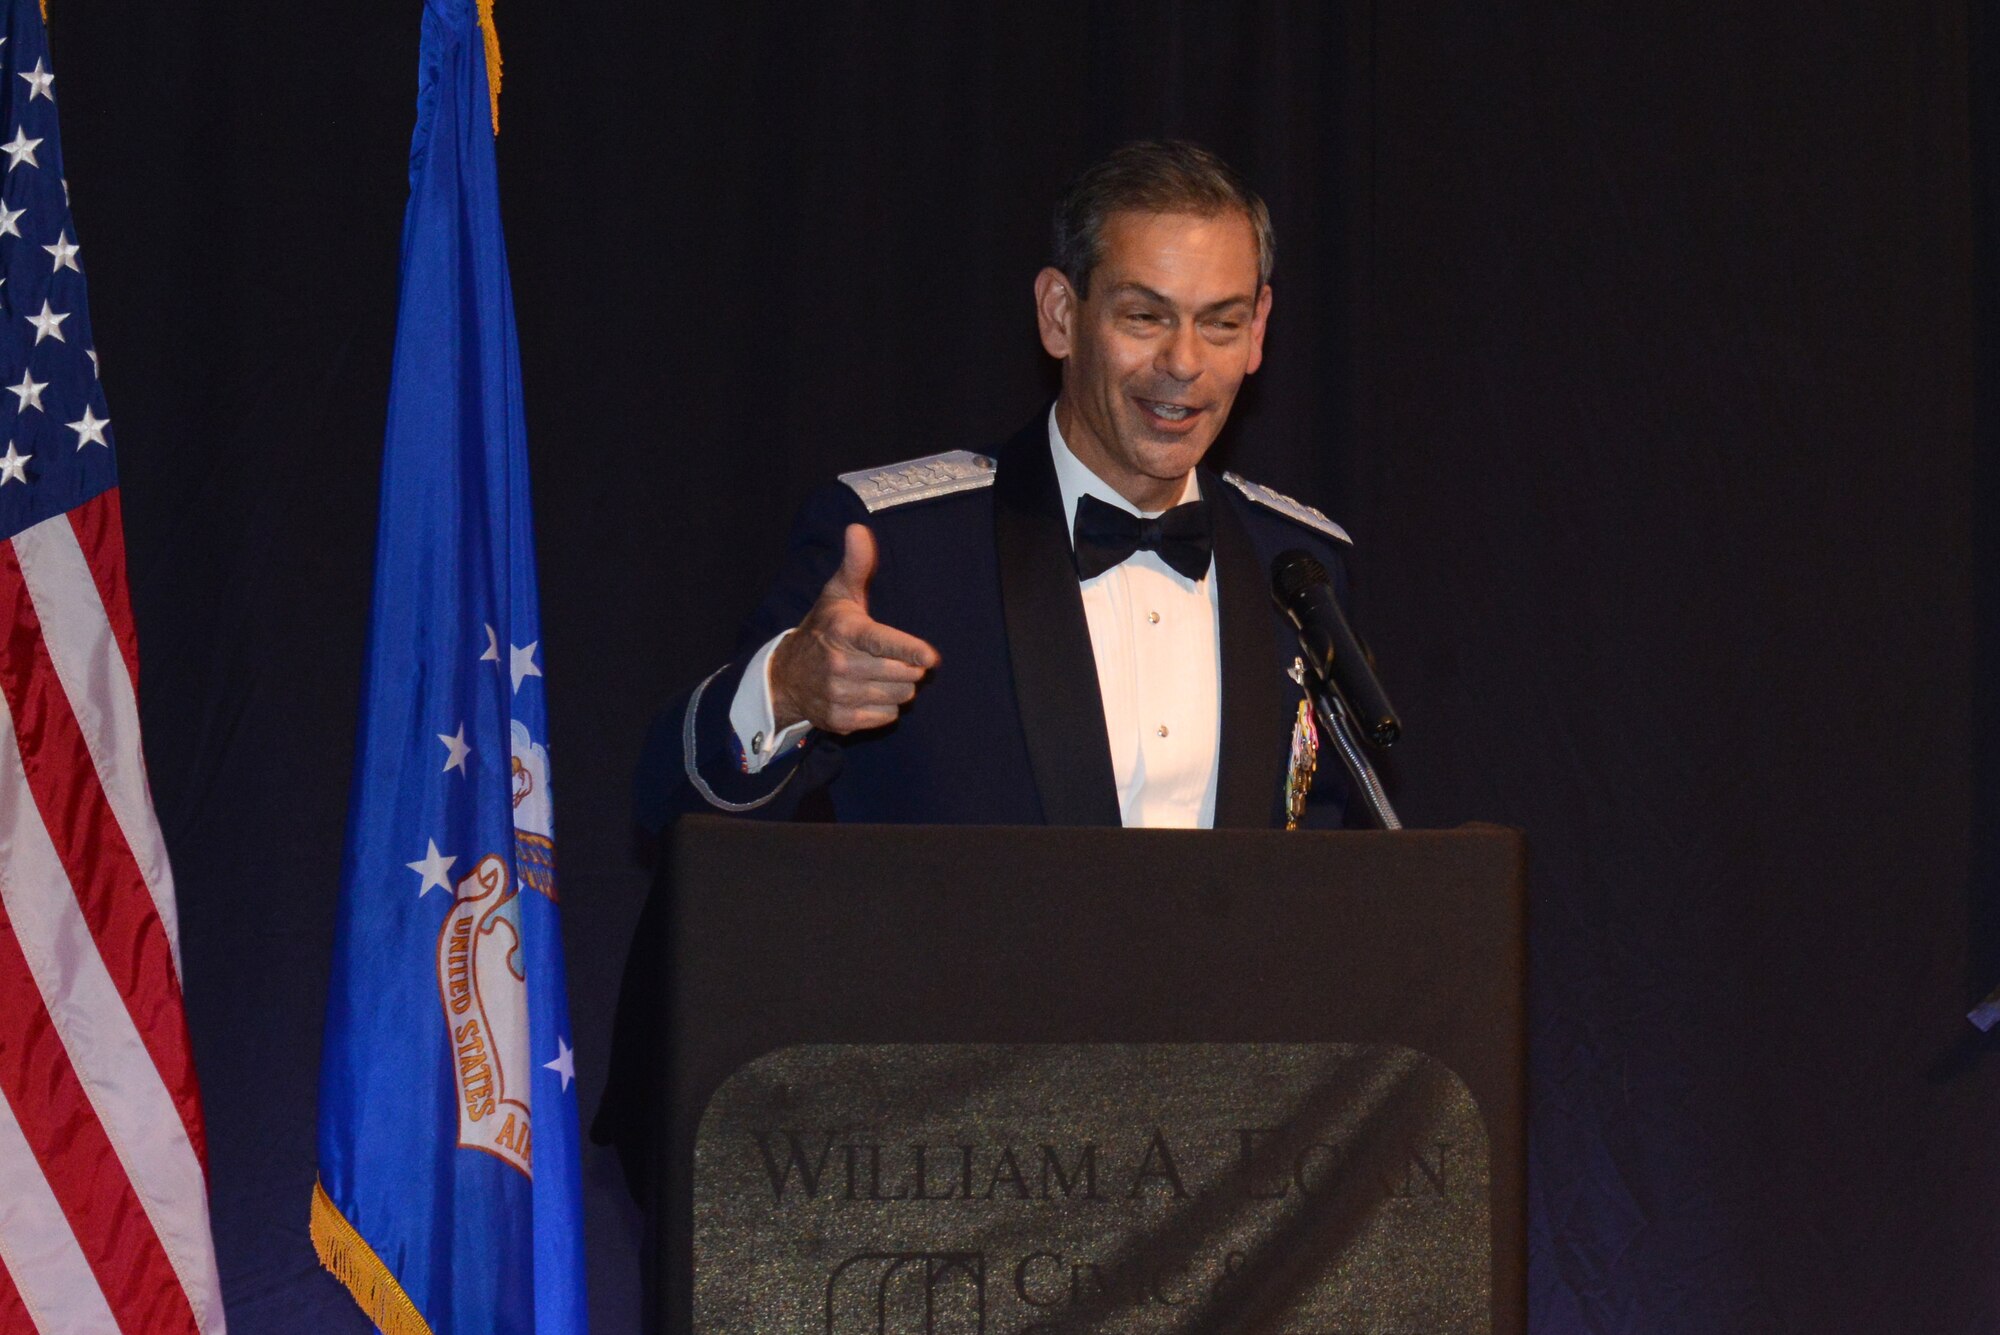 Air Force Lt. Gen. Kenneth Wilsbach, commander of the North American Aerospace Defense Command, Alaskan NORAD Region, U.S. Northern Command, Alaskan Command, and 11th Air Force, gives a speech during the 2016 Joint Base Elmendorf-Richardson Air Force Ball at the Anchorage Egan Center, Alaska, Sept. 24, 2016. This event marked the Air Force’s 69th birthday celebrating the Air Force’s heritage through reflection, ceremony and camaraderie.